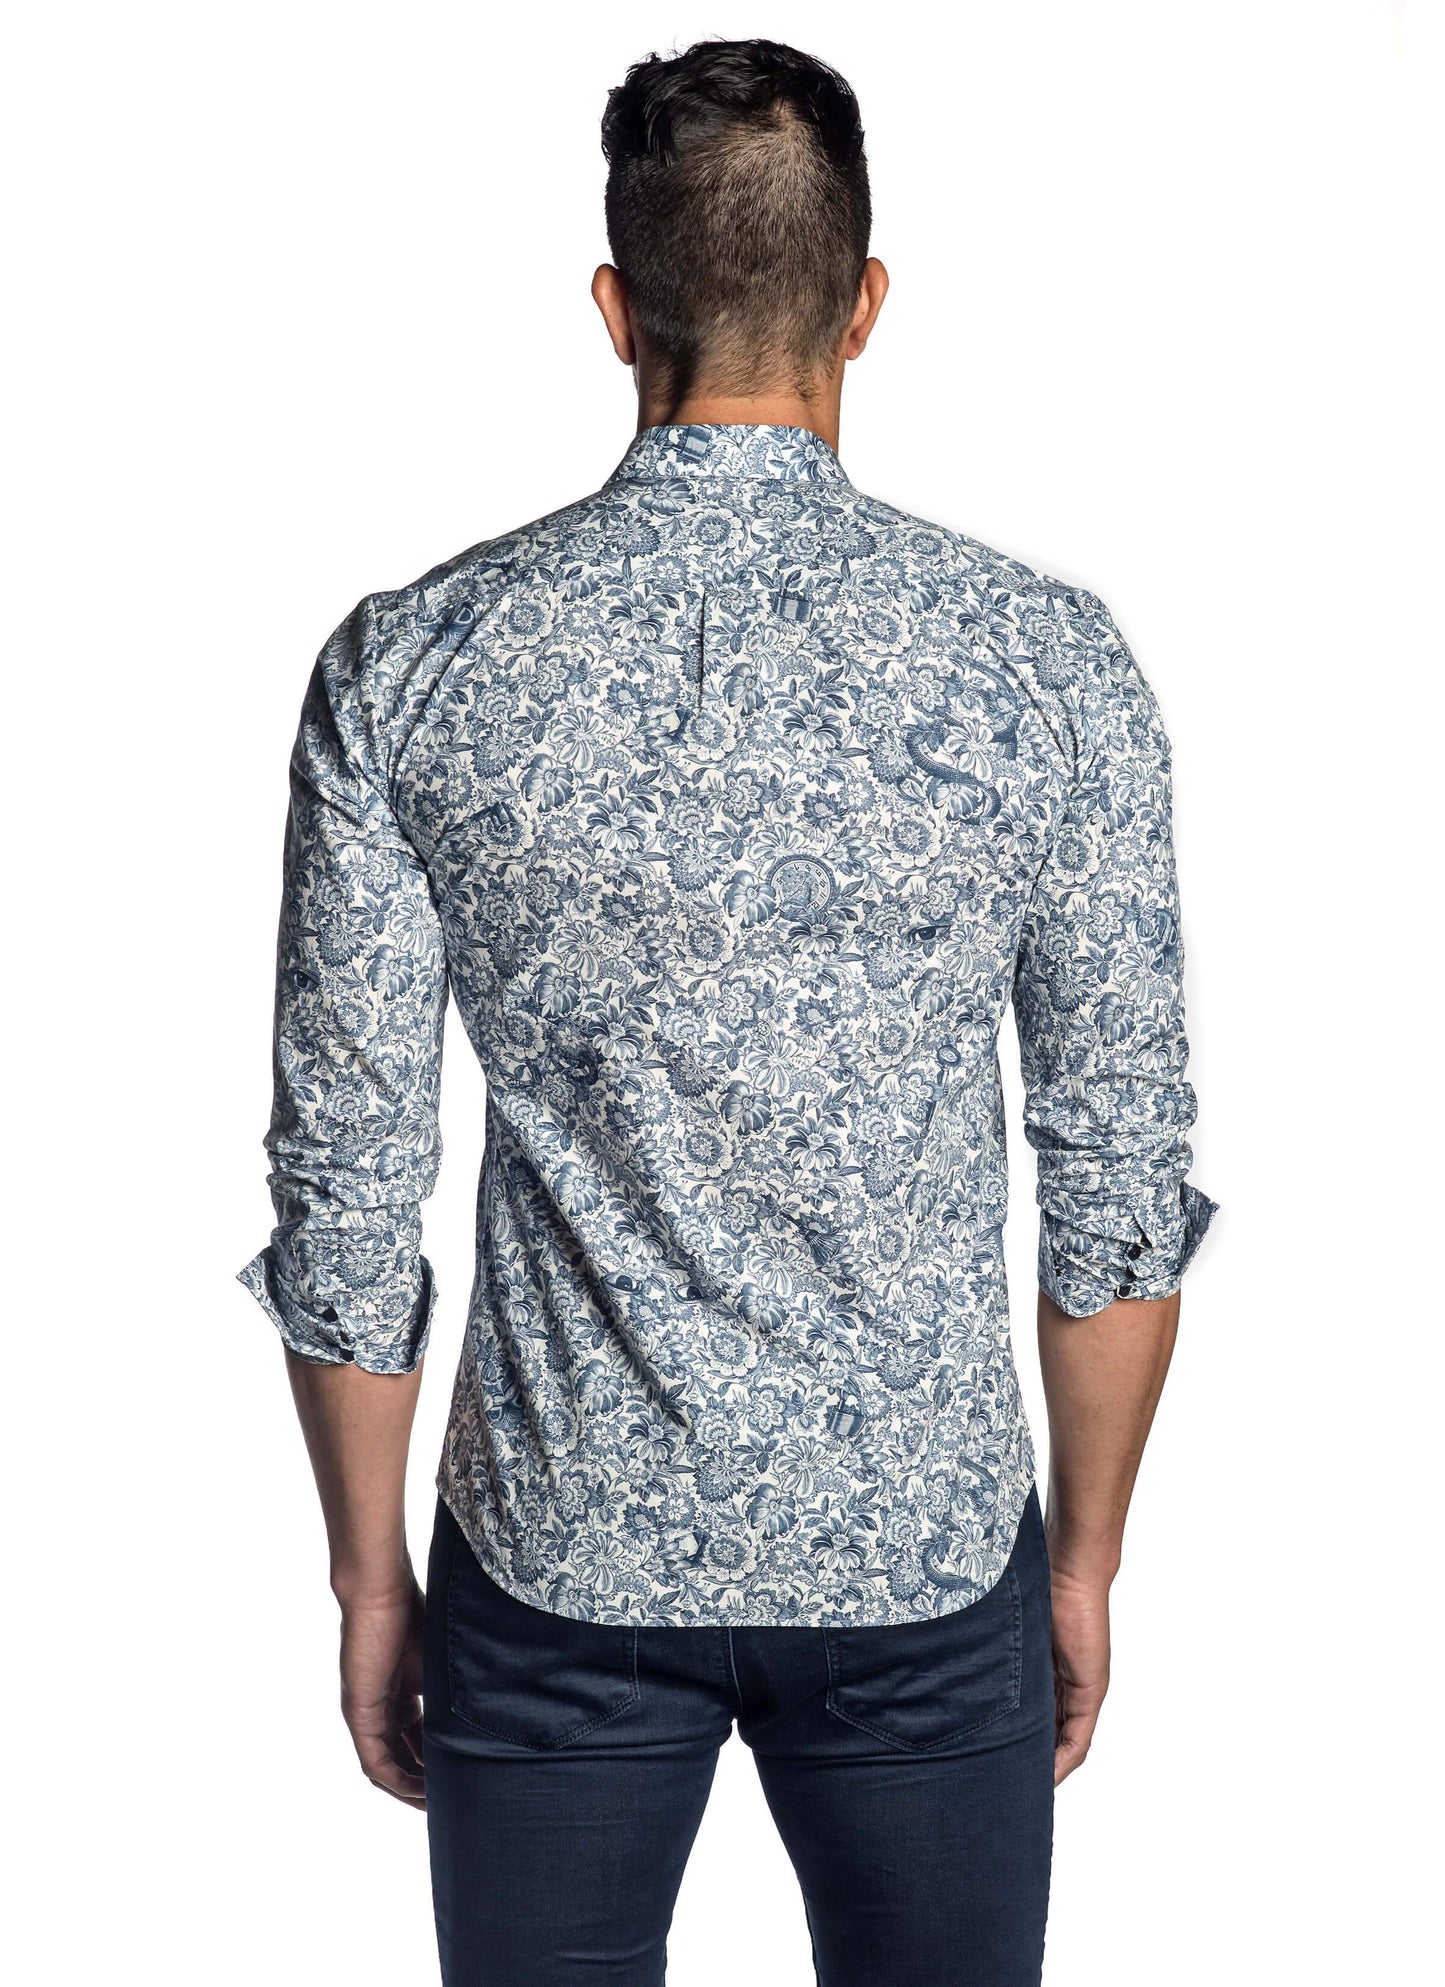 White and Blue Floral Shirt for Men ITA-T-8091 - Back - Jared Lang